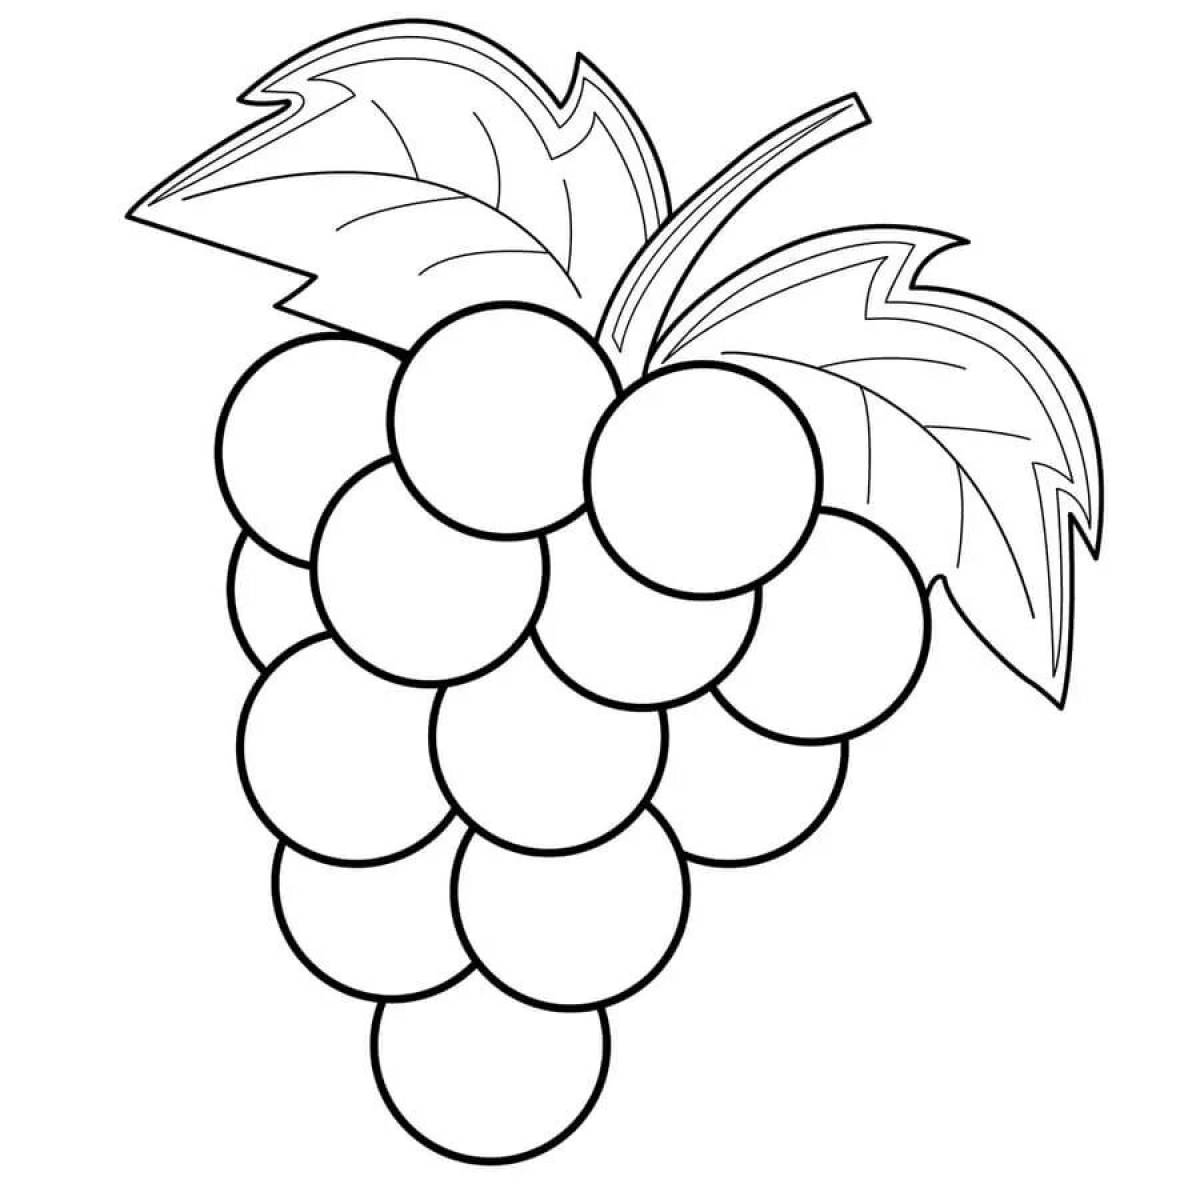 Cute grape coloring page for kids